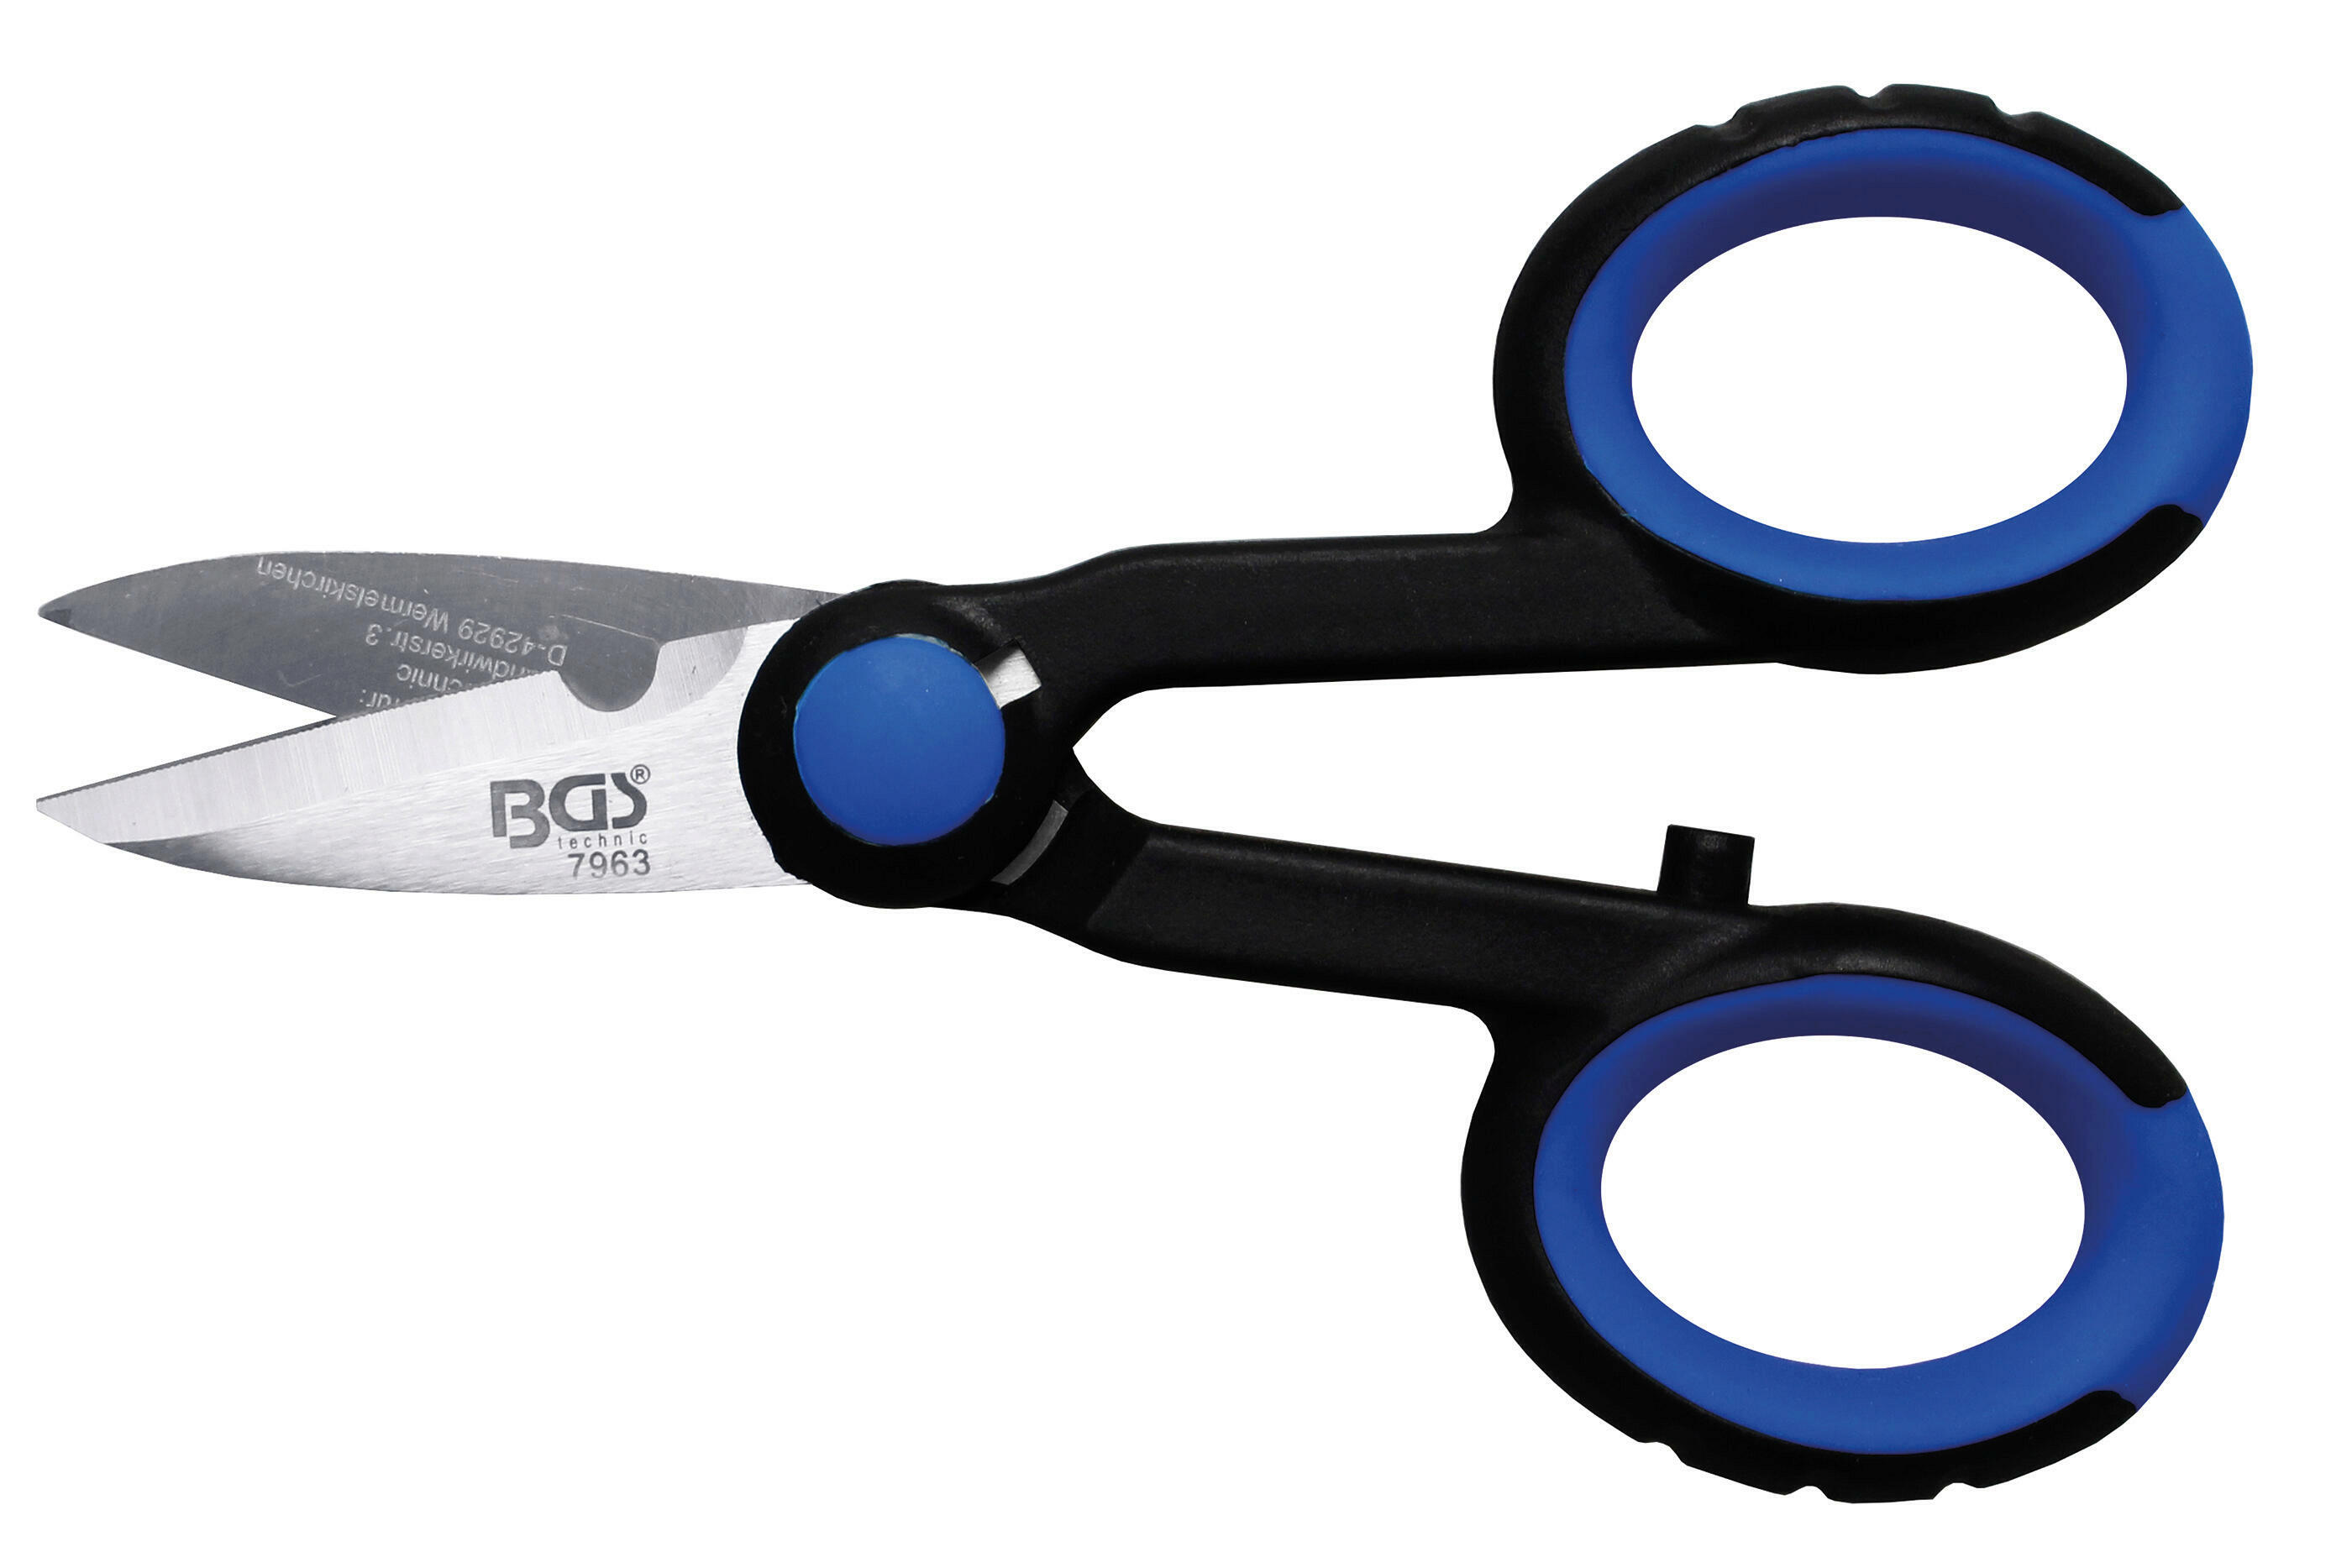 BGS Cable Shears